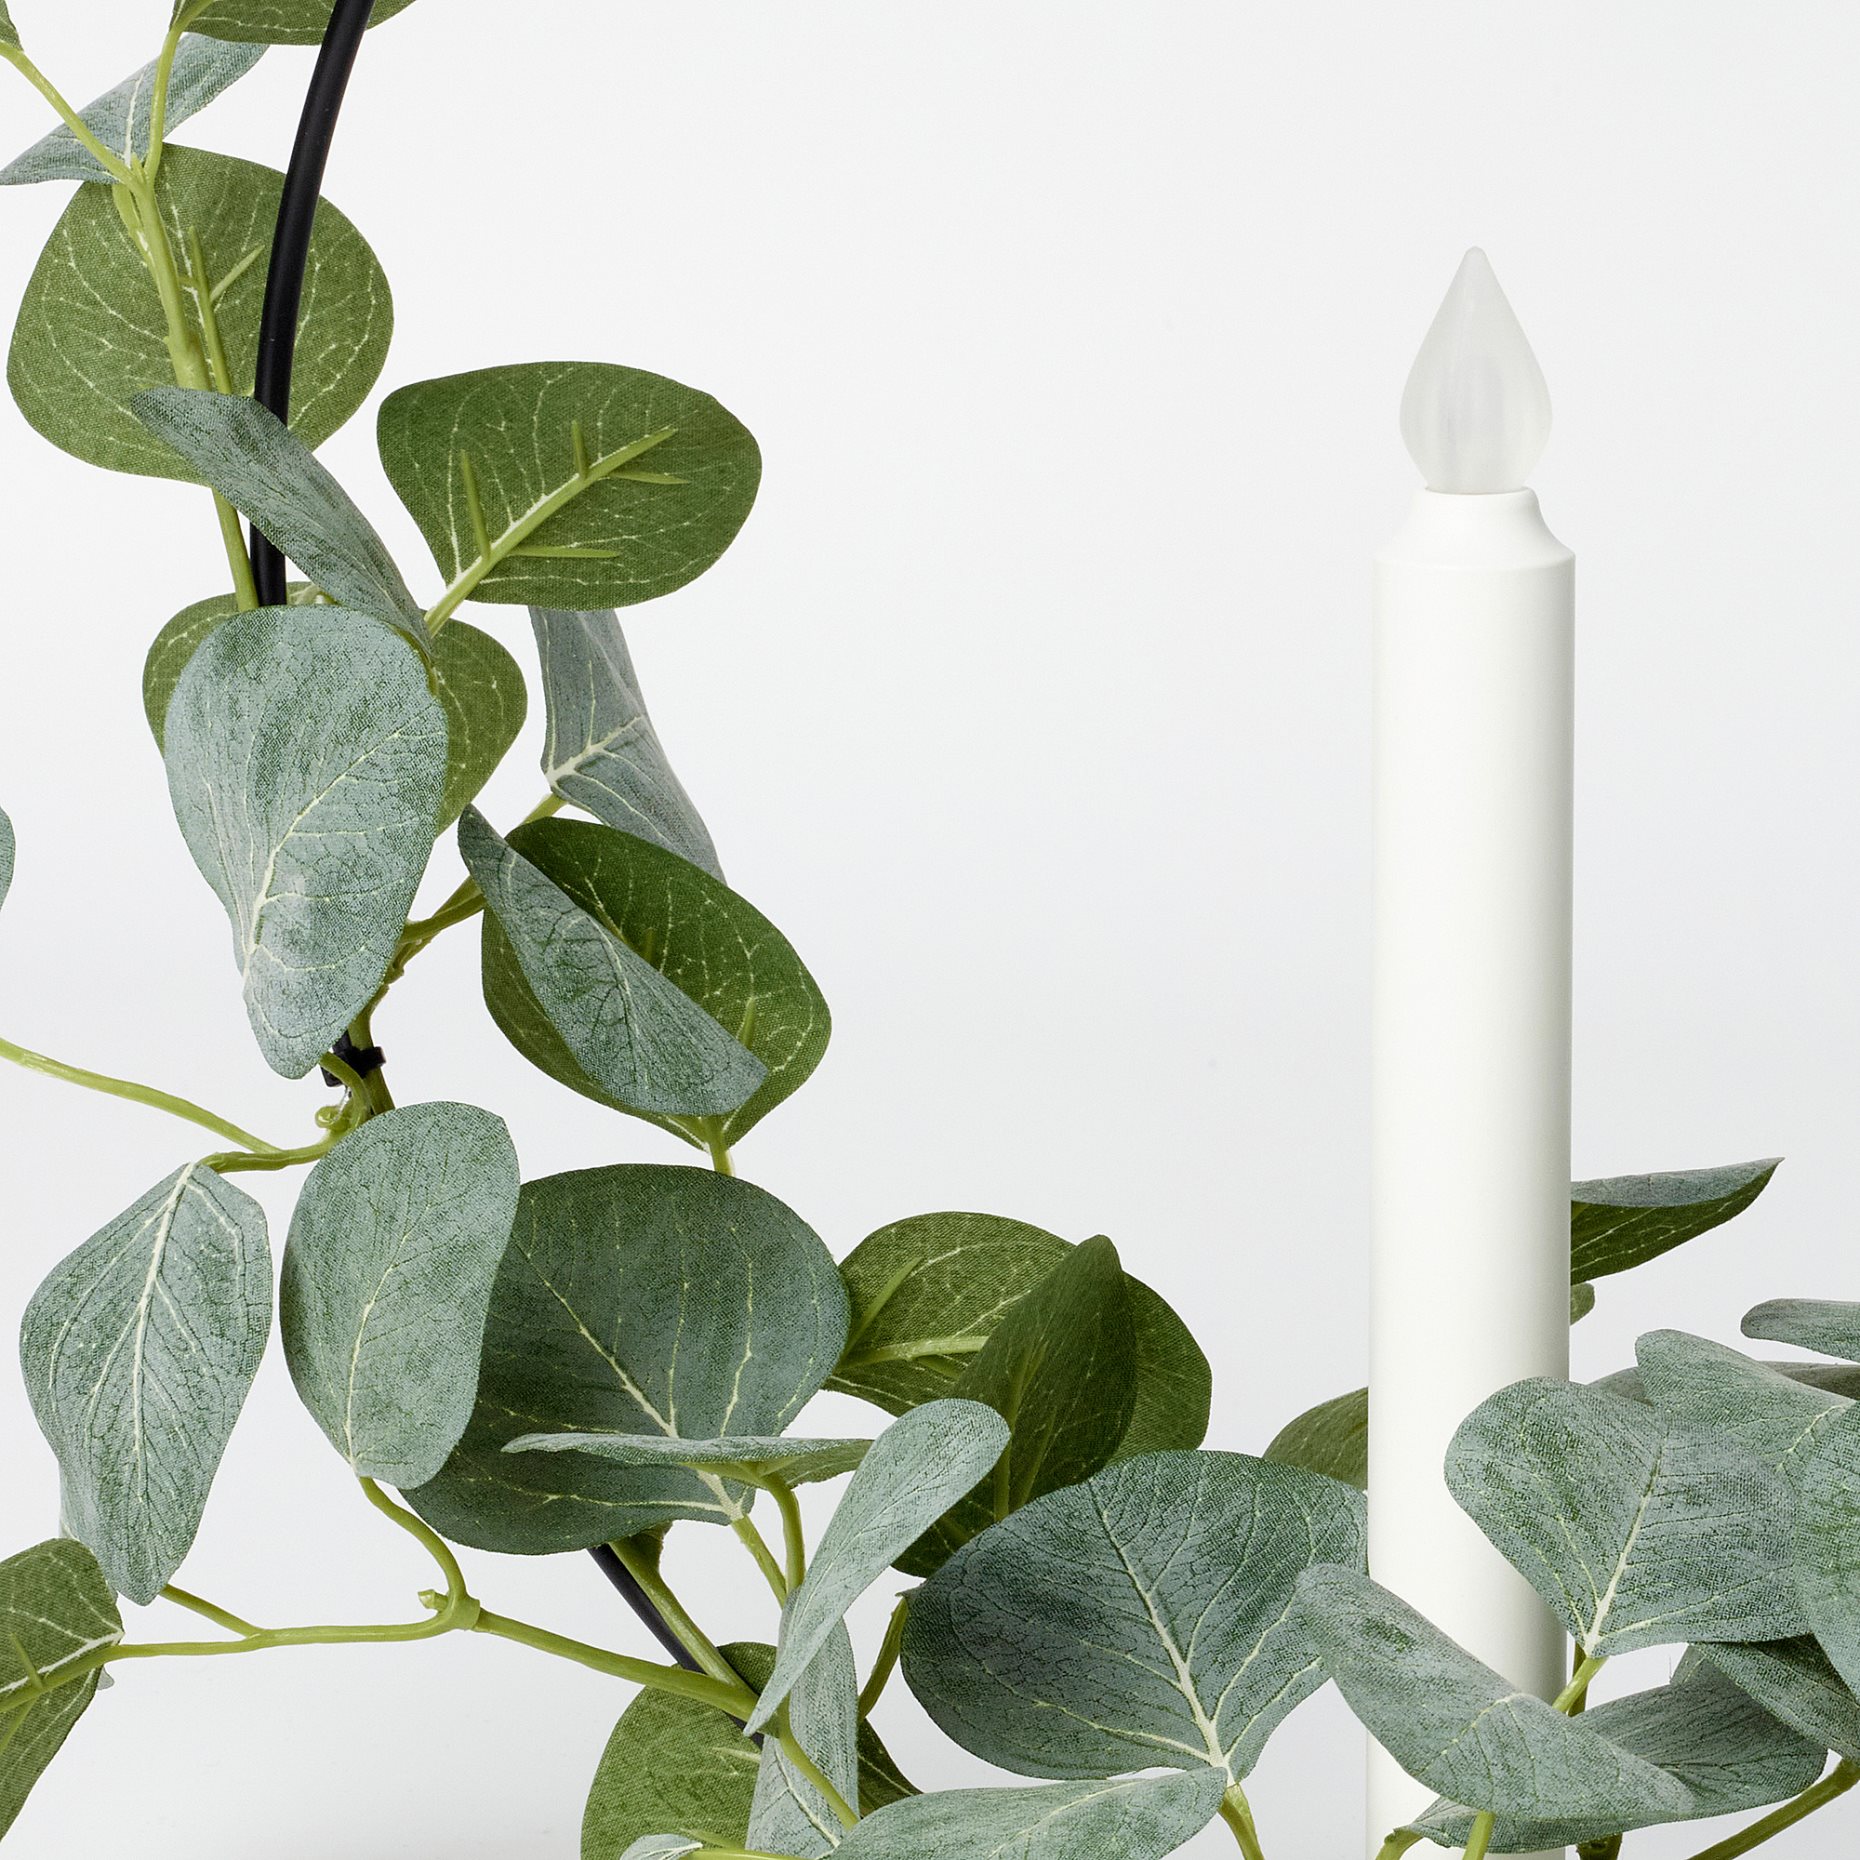 STRÅLA, candle holder with built-in LED light source/artificial eucalyptus/battery-operated, 36 cm, 705.630.63